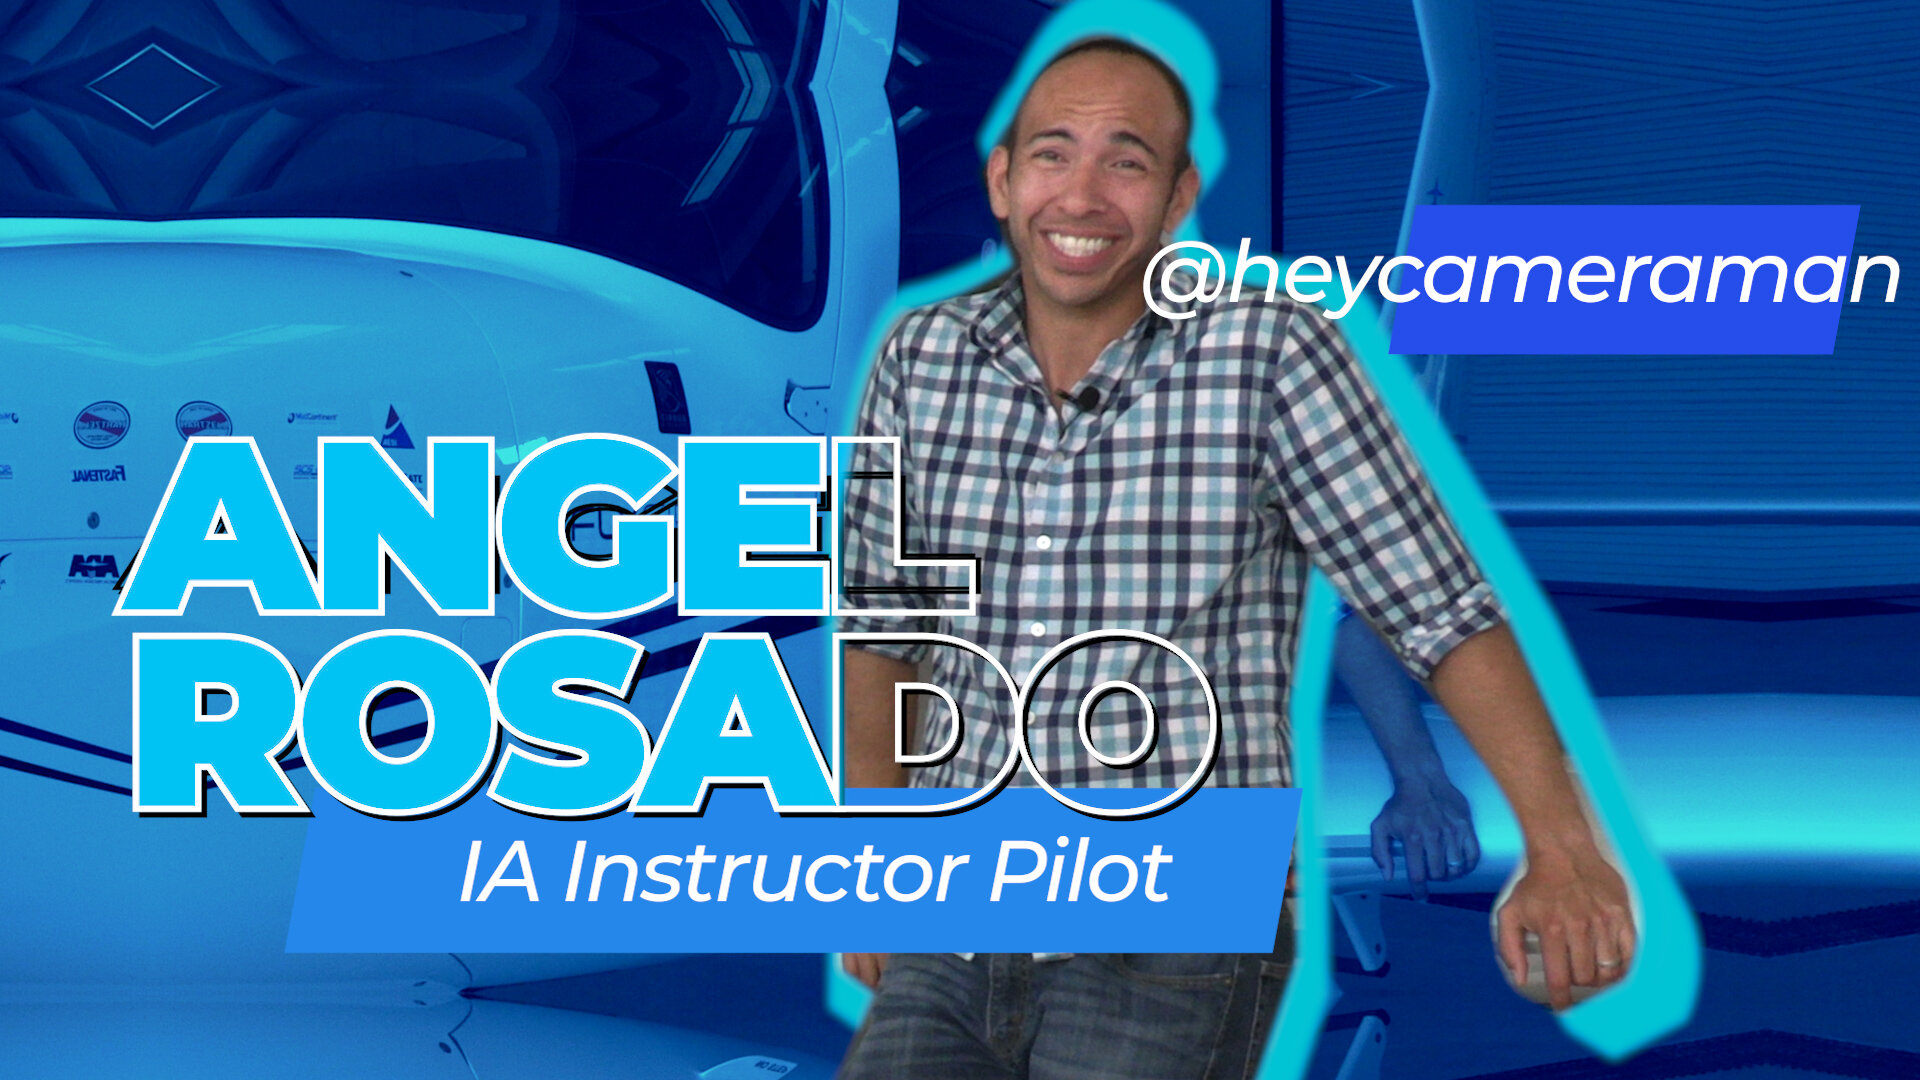 Learn about IA Instructor Angel Rosado!